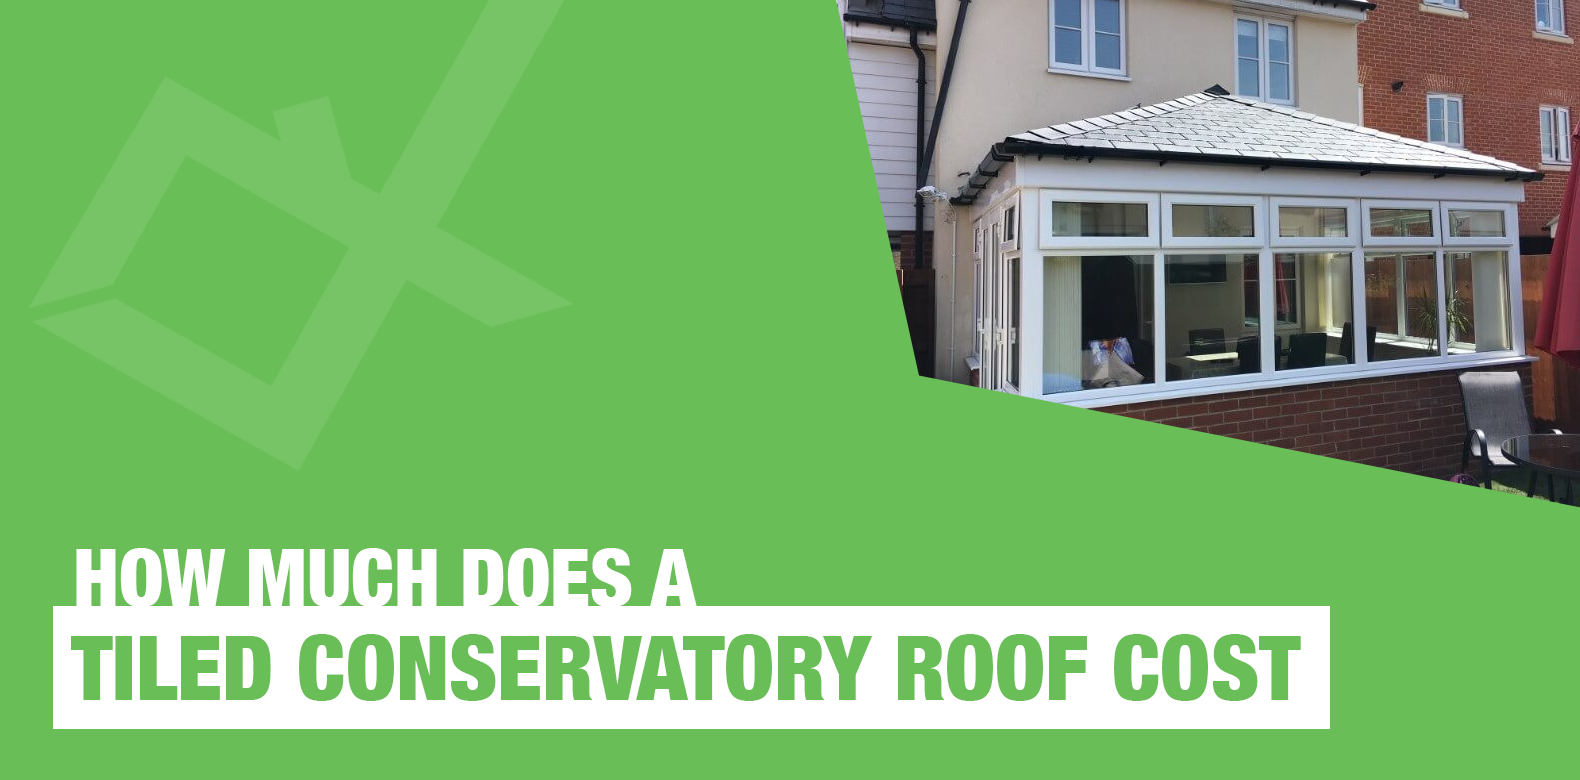 How Much Does a Tiled Conservatory  Roof Cost?